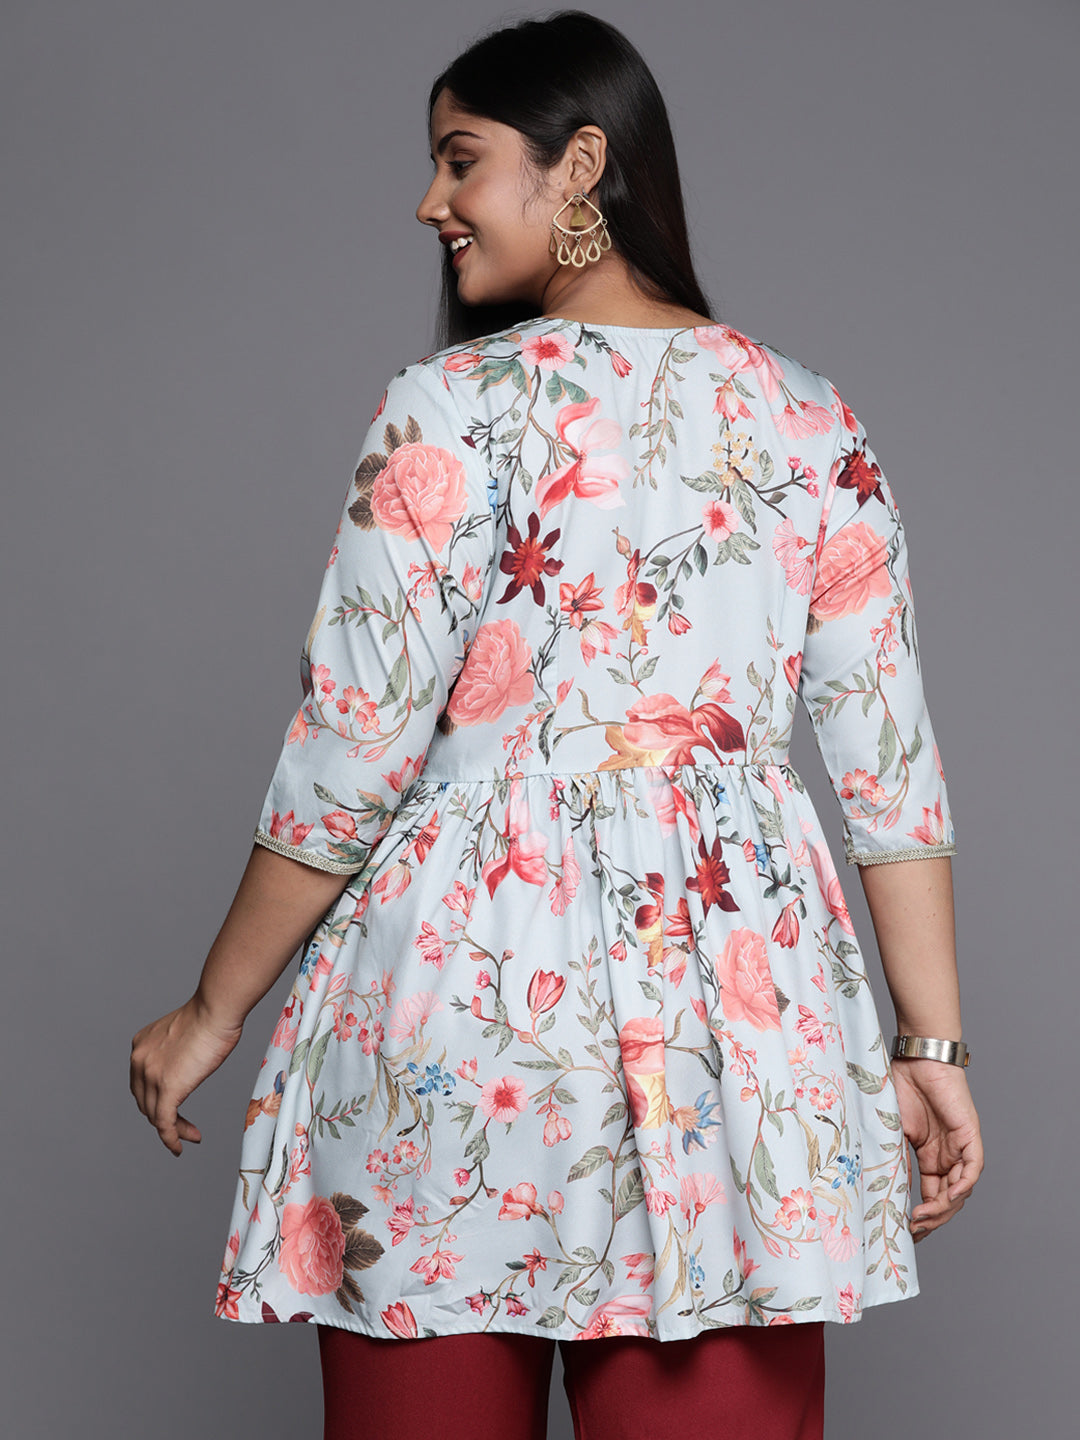 A PLUS BY AHALYAA Plus Size Floral Printed Tunic